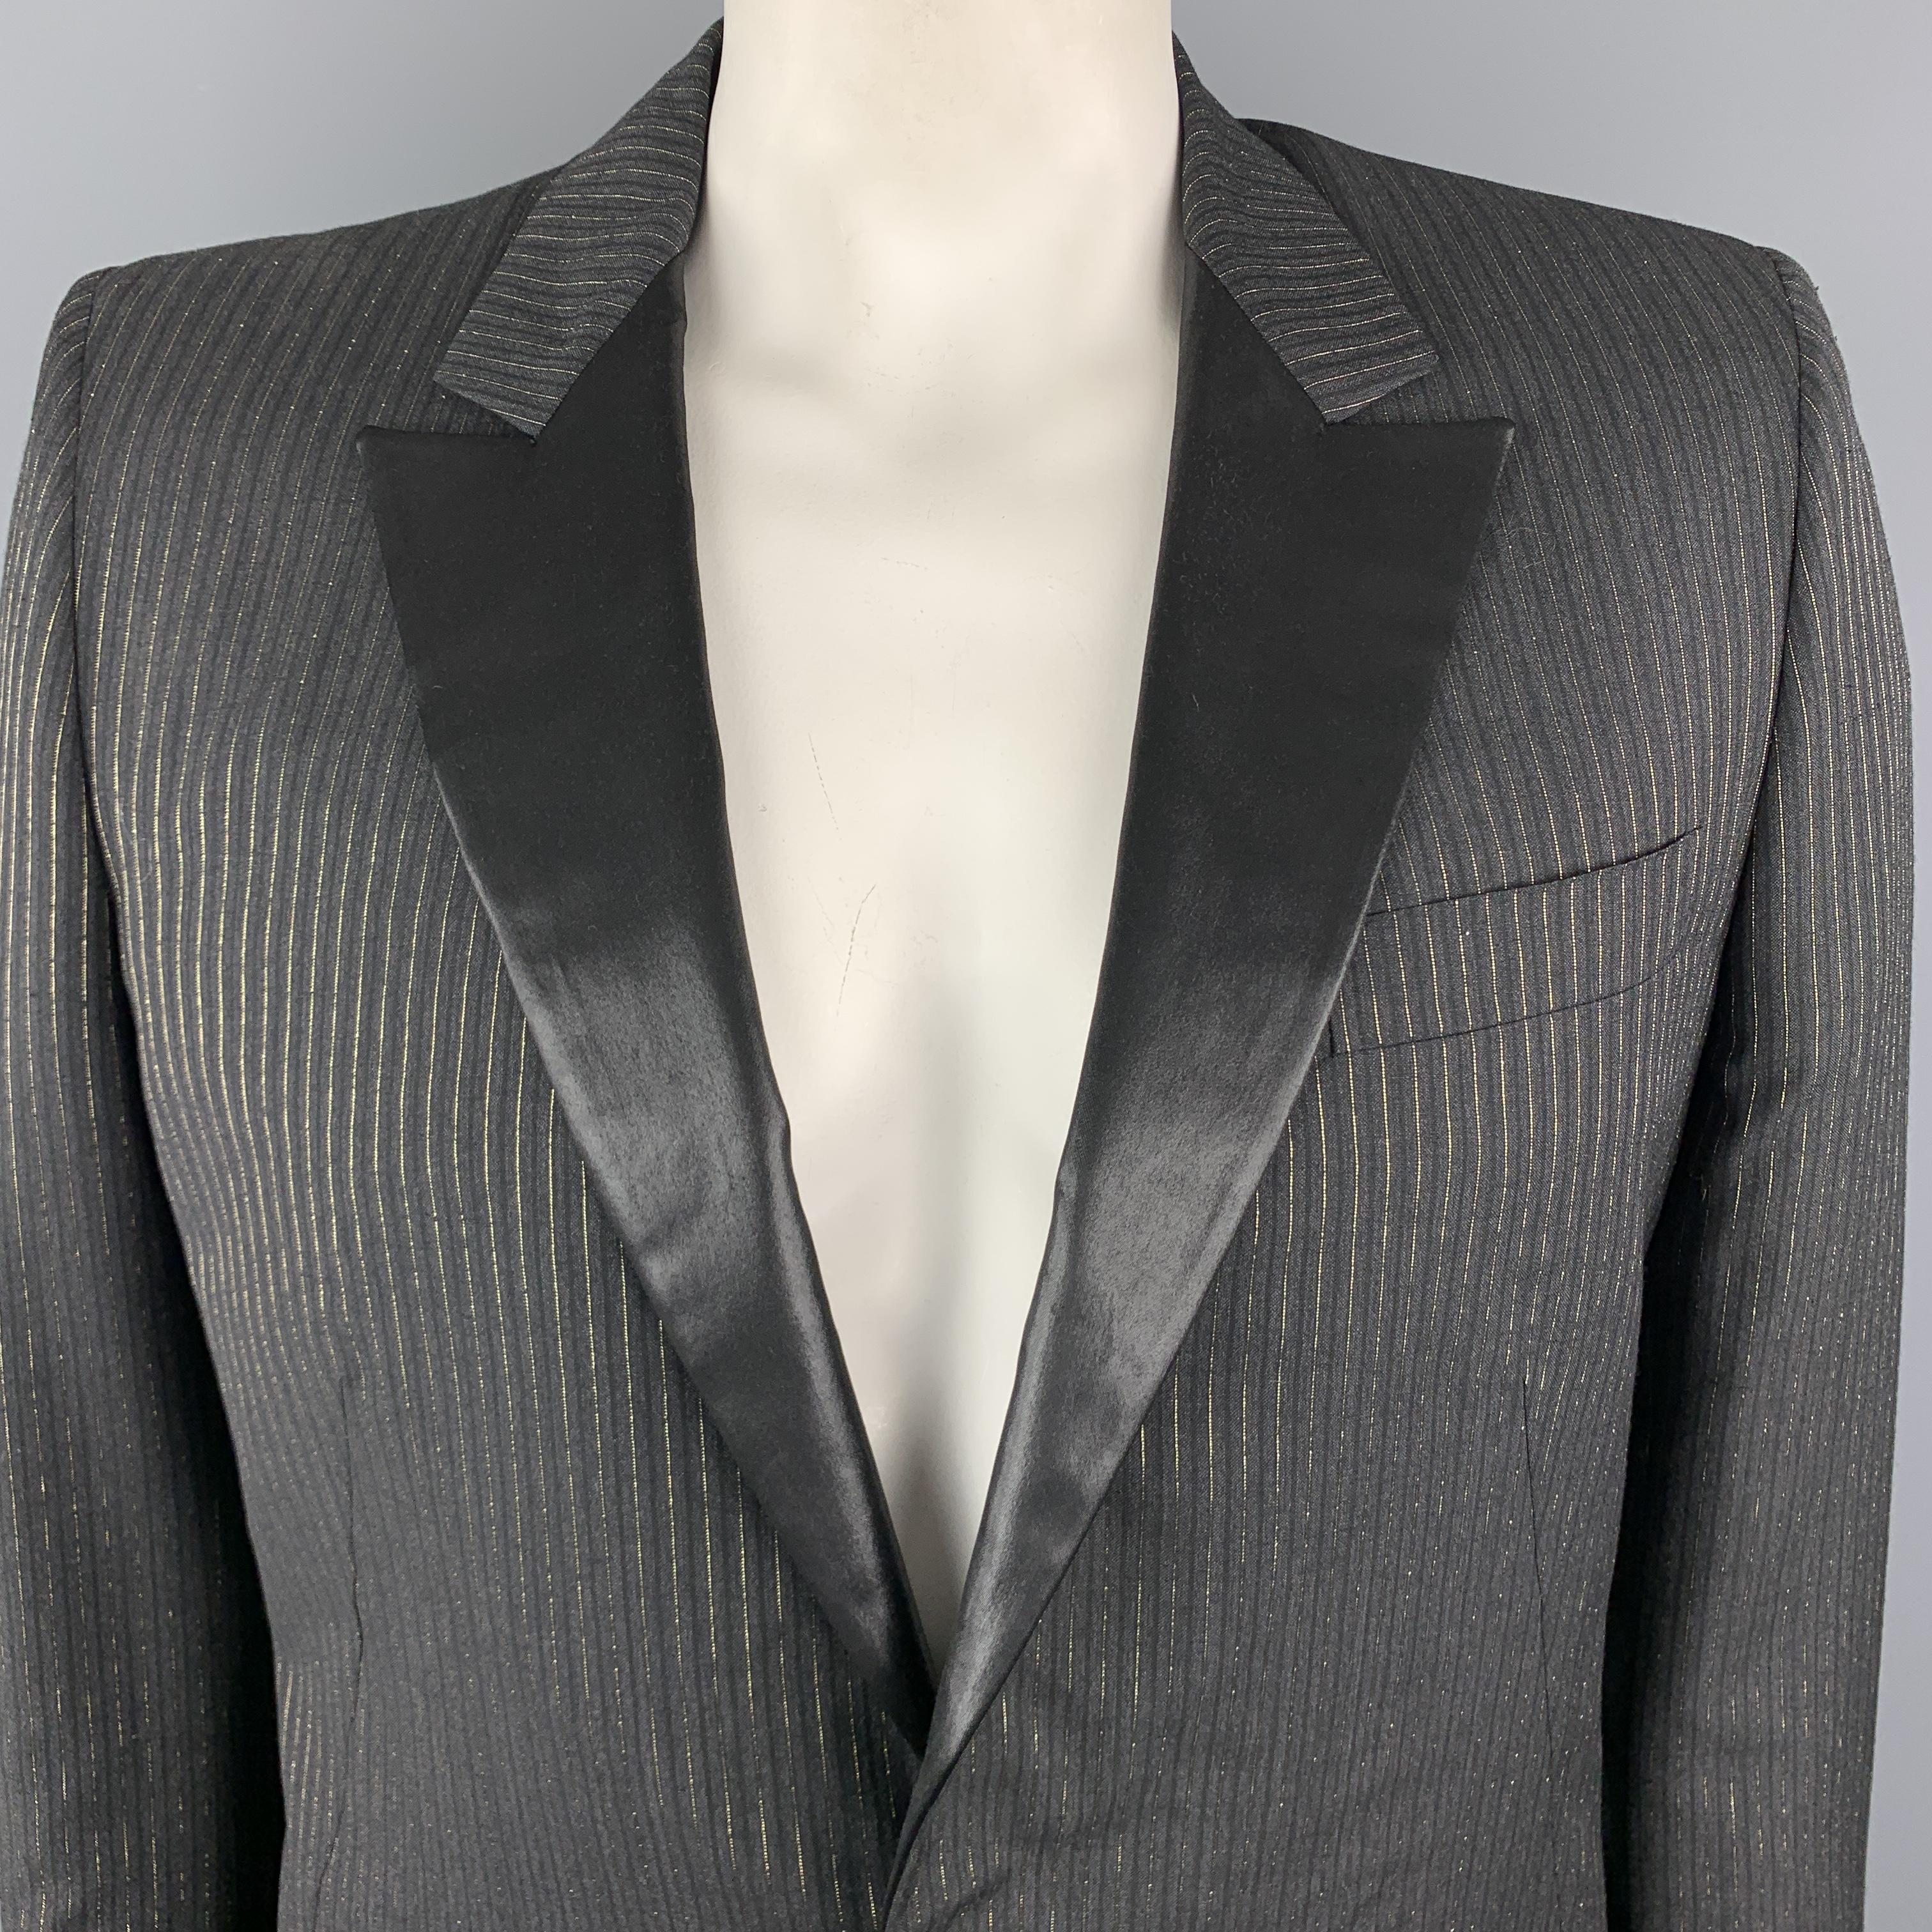 ALEXANDER MCQUEEN sport coat comes in charcoal wool blend fabric with black and gold foil stripes and features a shiny coated peak lapel, single breasted, one button front, and slanted pockets. Made in Italy.

Excellent Pre-Owned Condition. 
Marked: